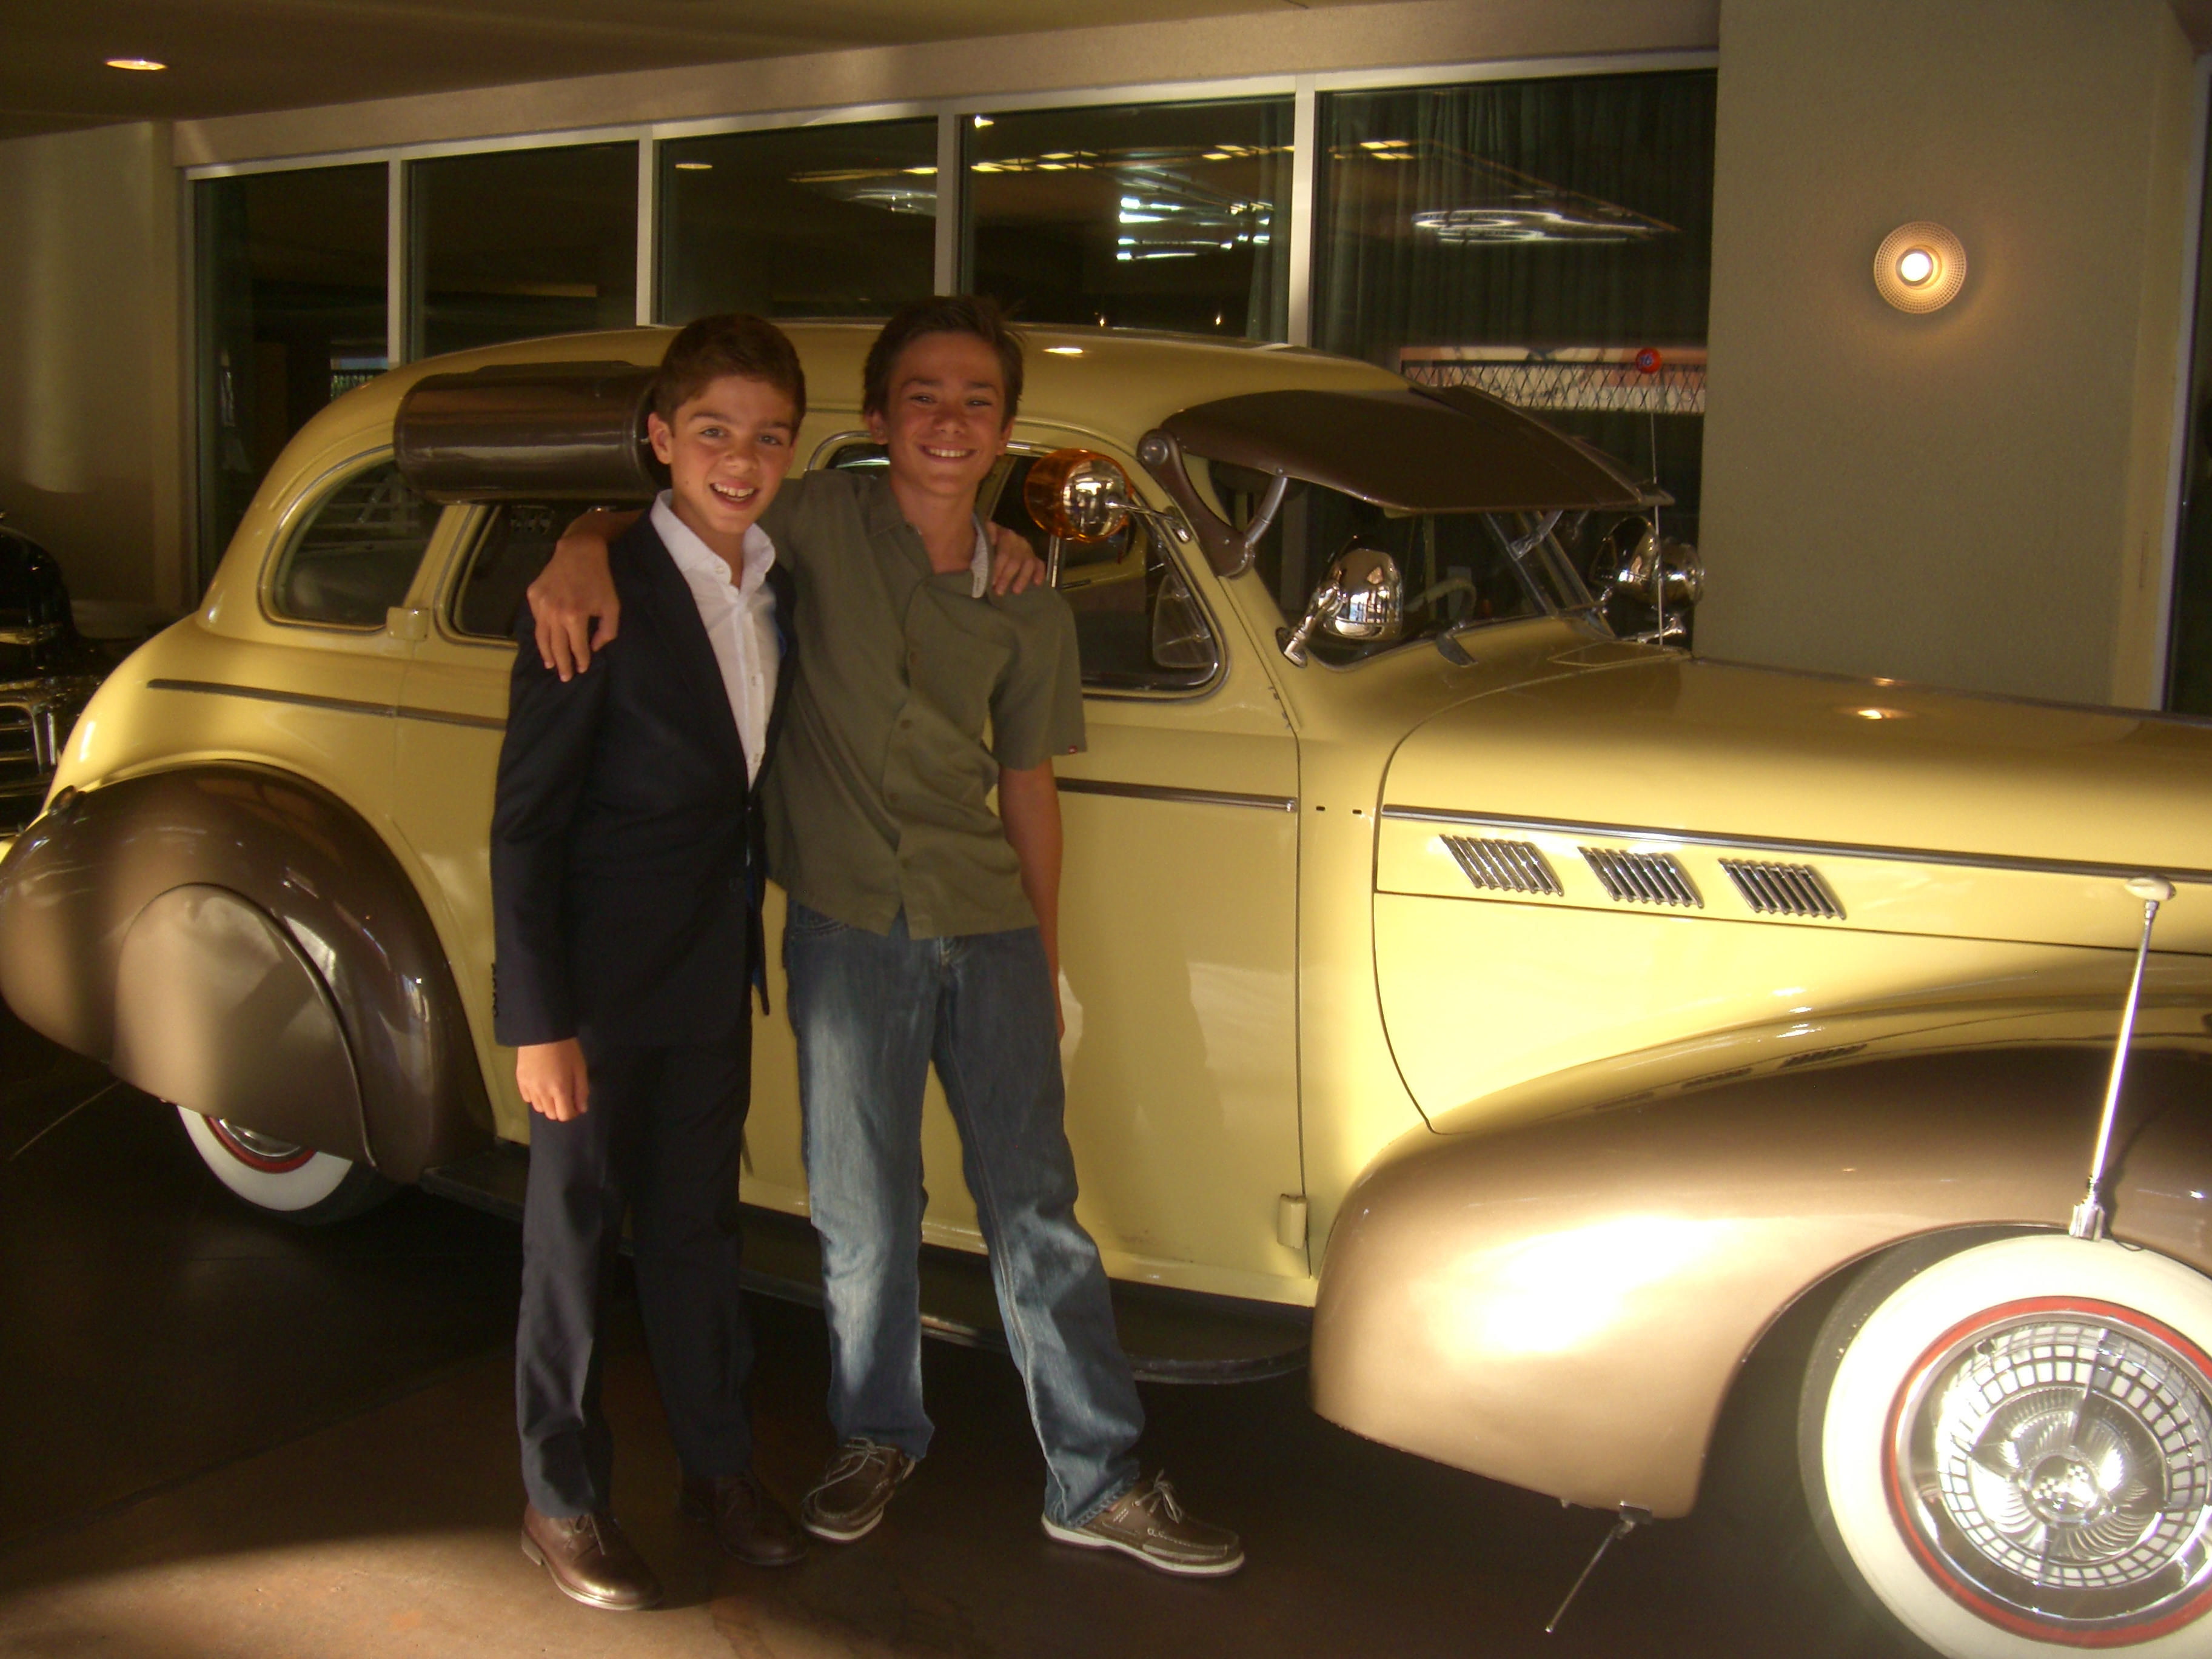 Bless Me, Ultima 2012 world premier el paso texas. Diego Miro - Florence and Christian Traeumer- Bones getting ready to board the cars to the red ccarpet! Sept 2012